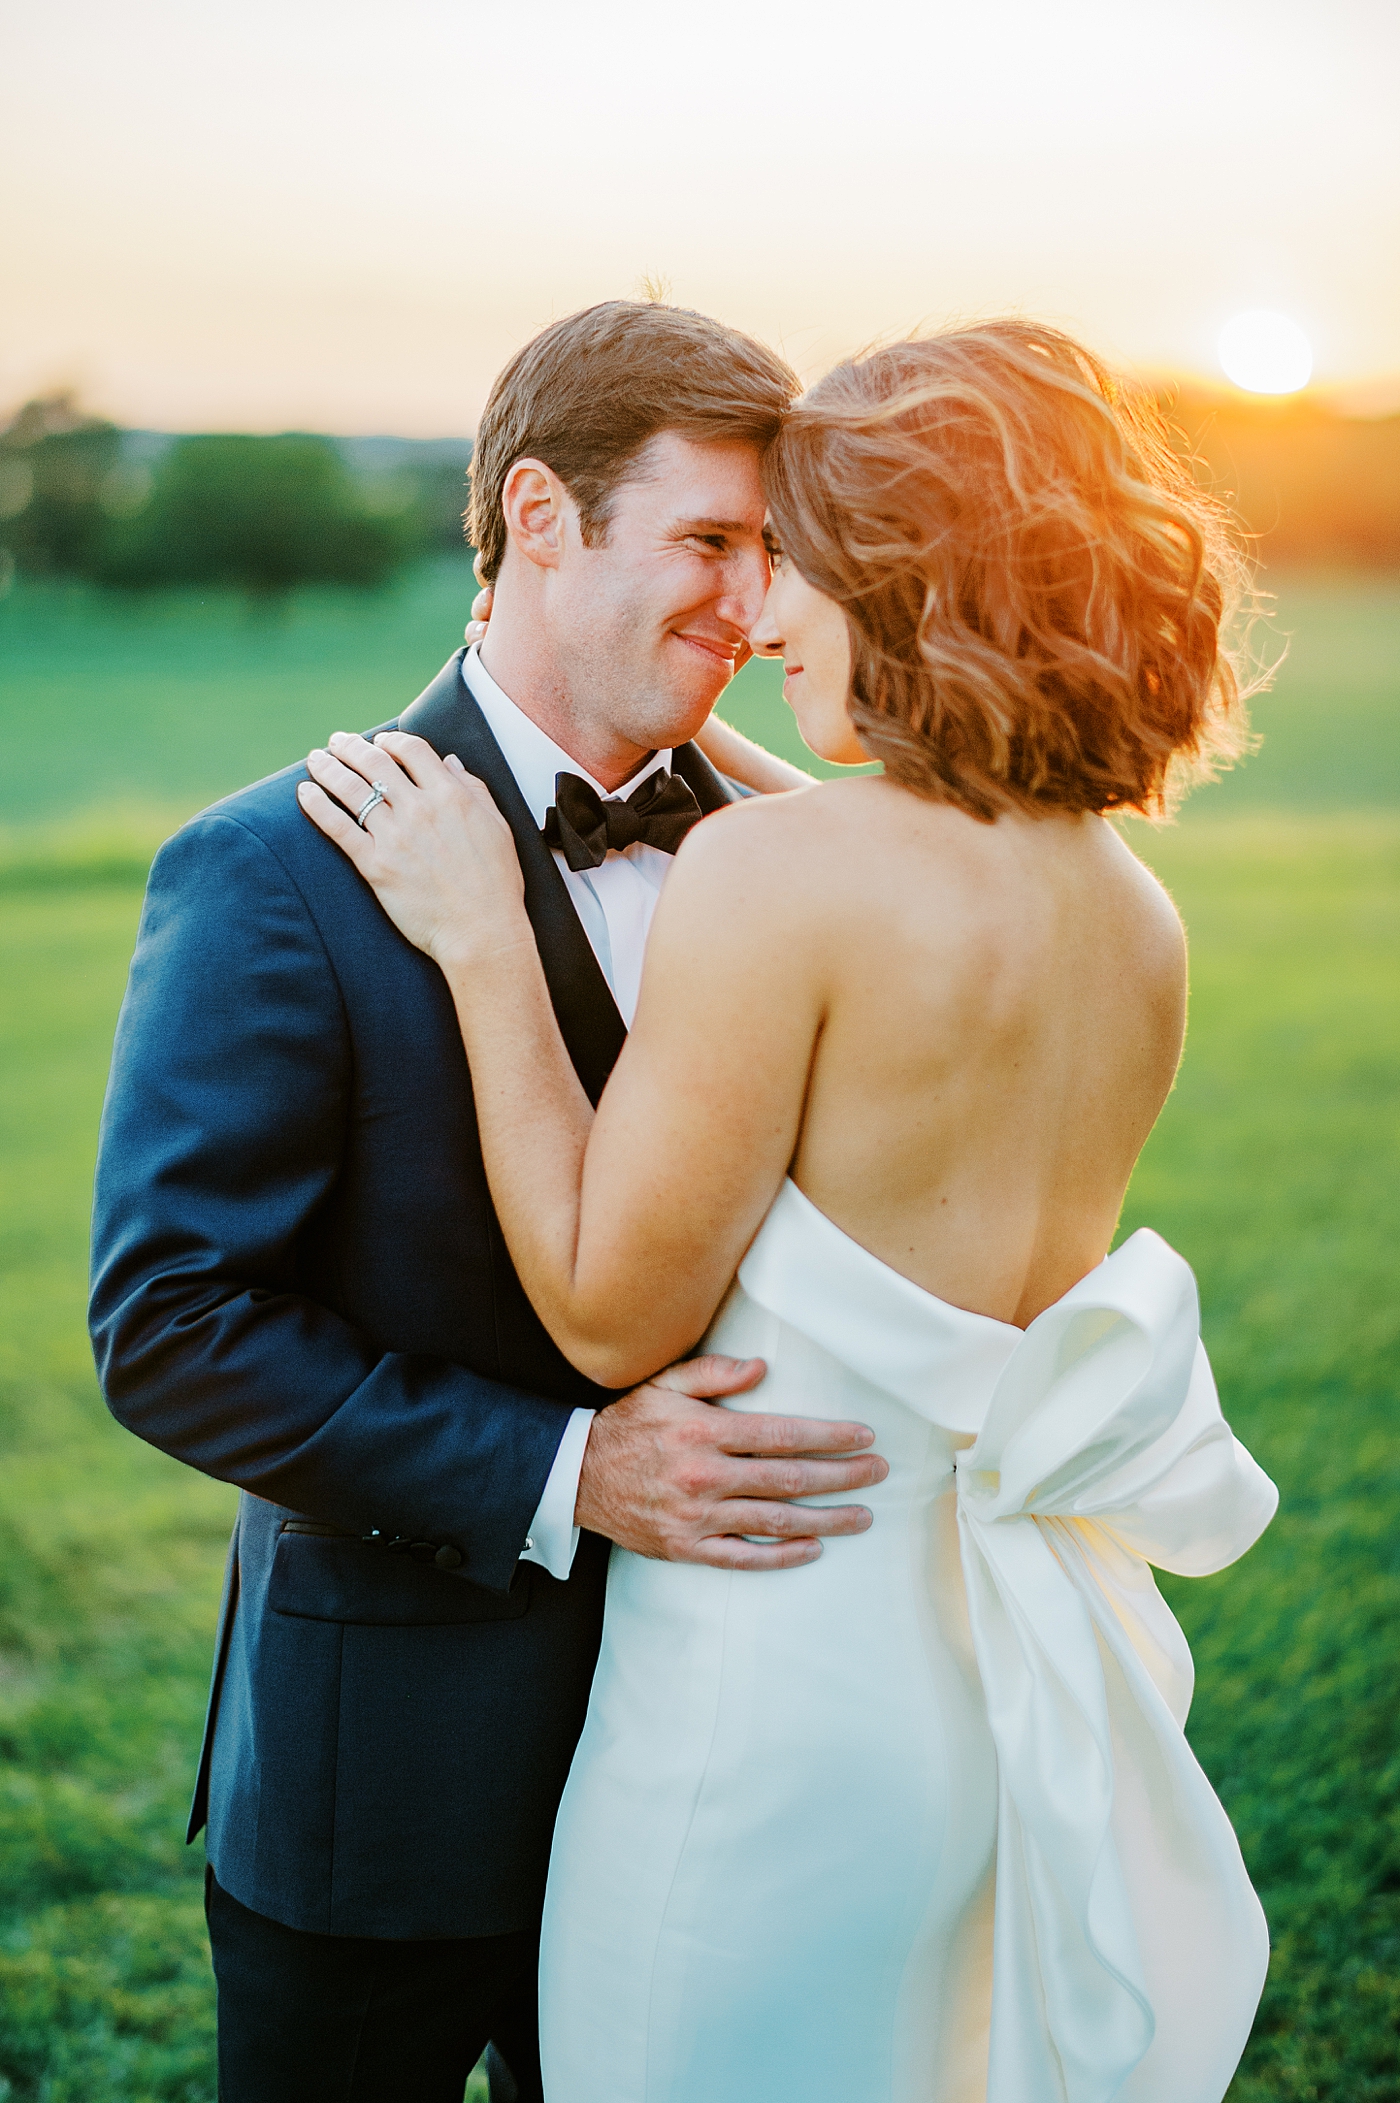 Bride and Groom sunset portraits | Summer Camp meets Parent Trap Vibes at Brittland Manor Wedding by Eastern Shore Wedding photographer Lauren R Swann photo